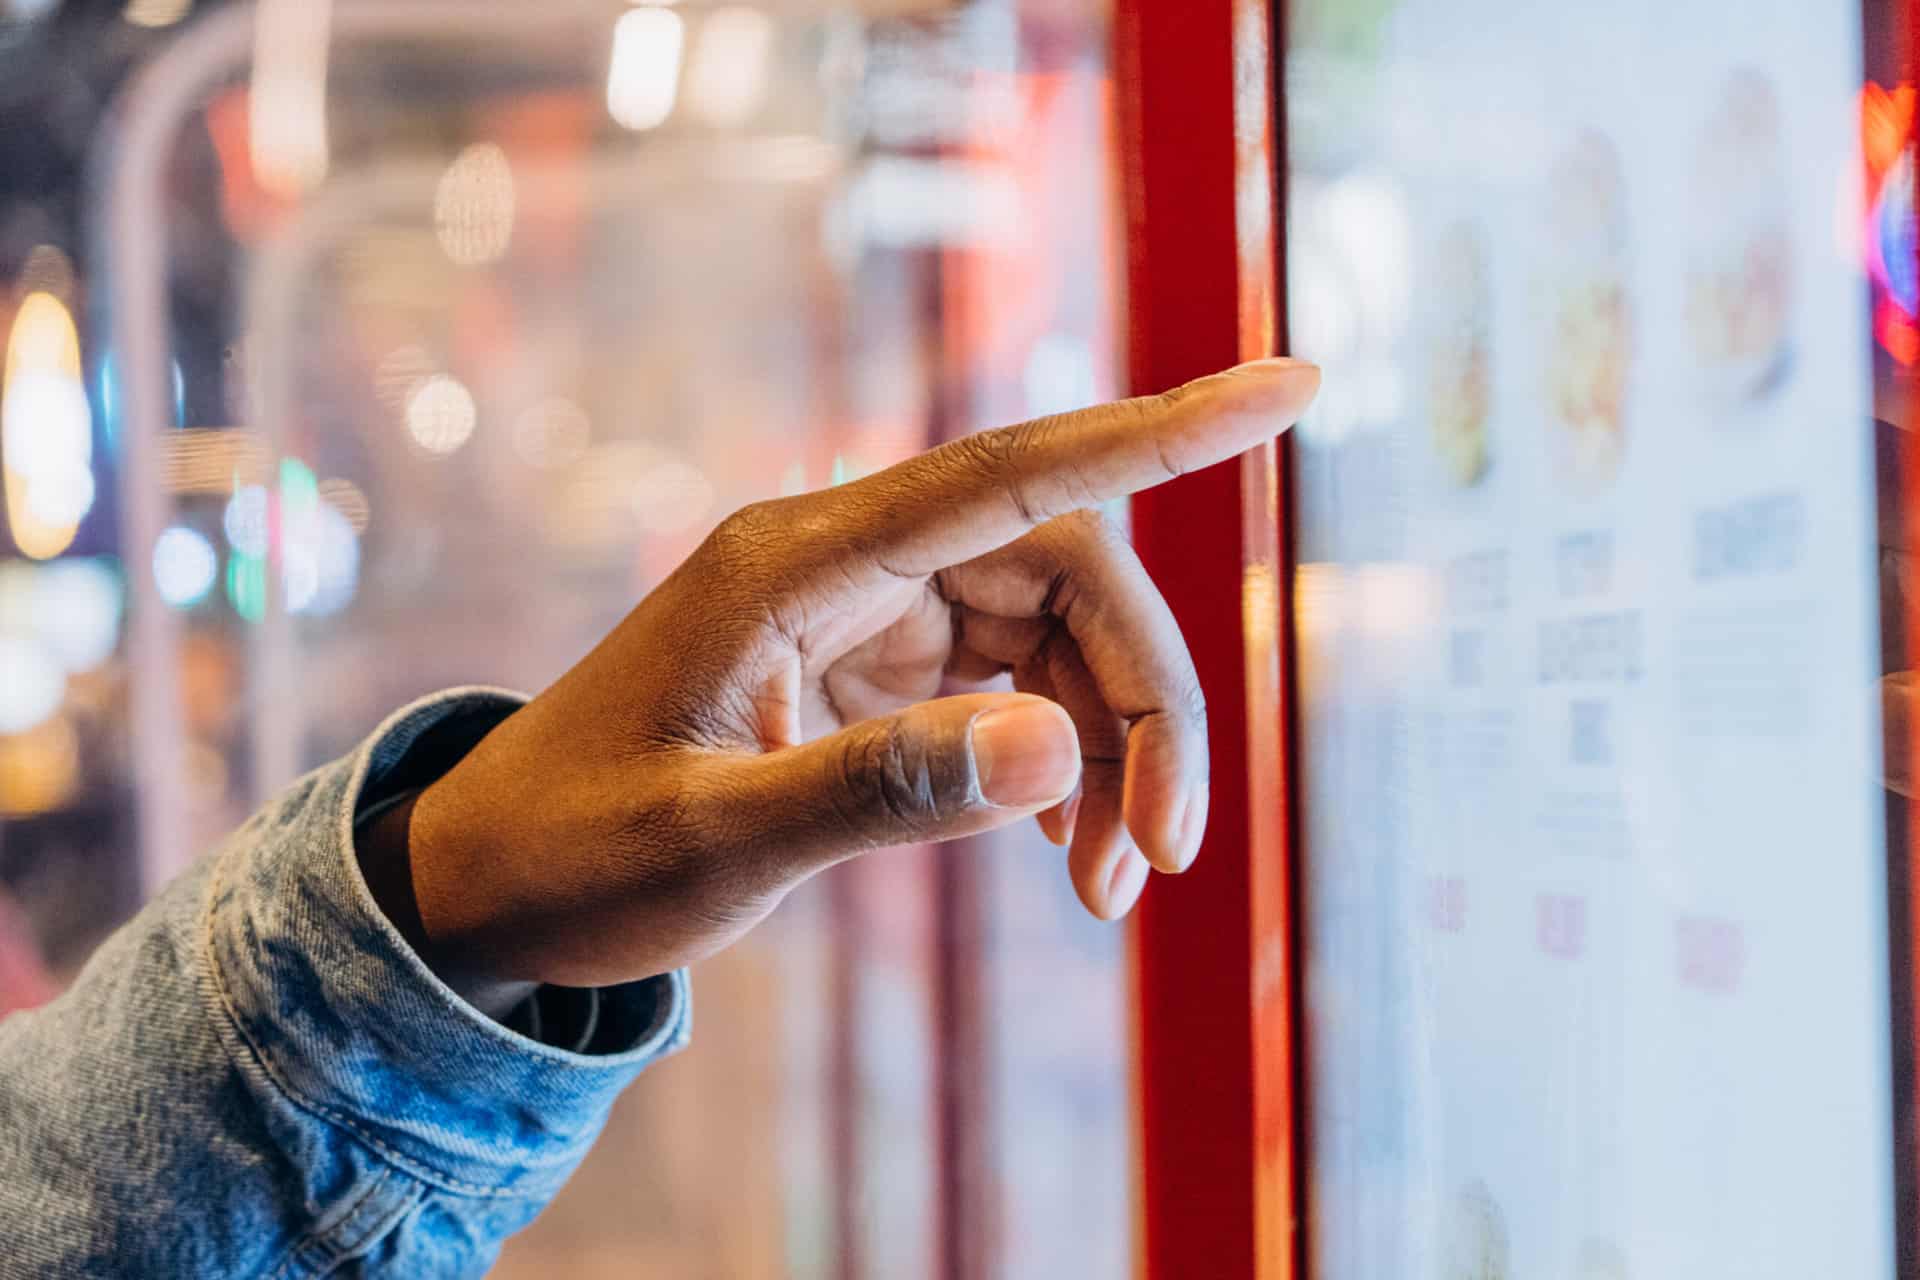 A close-up African finger selects a burger on an electronic touch screen at a self-service checkout at a fast food restaurant